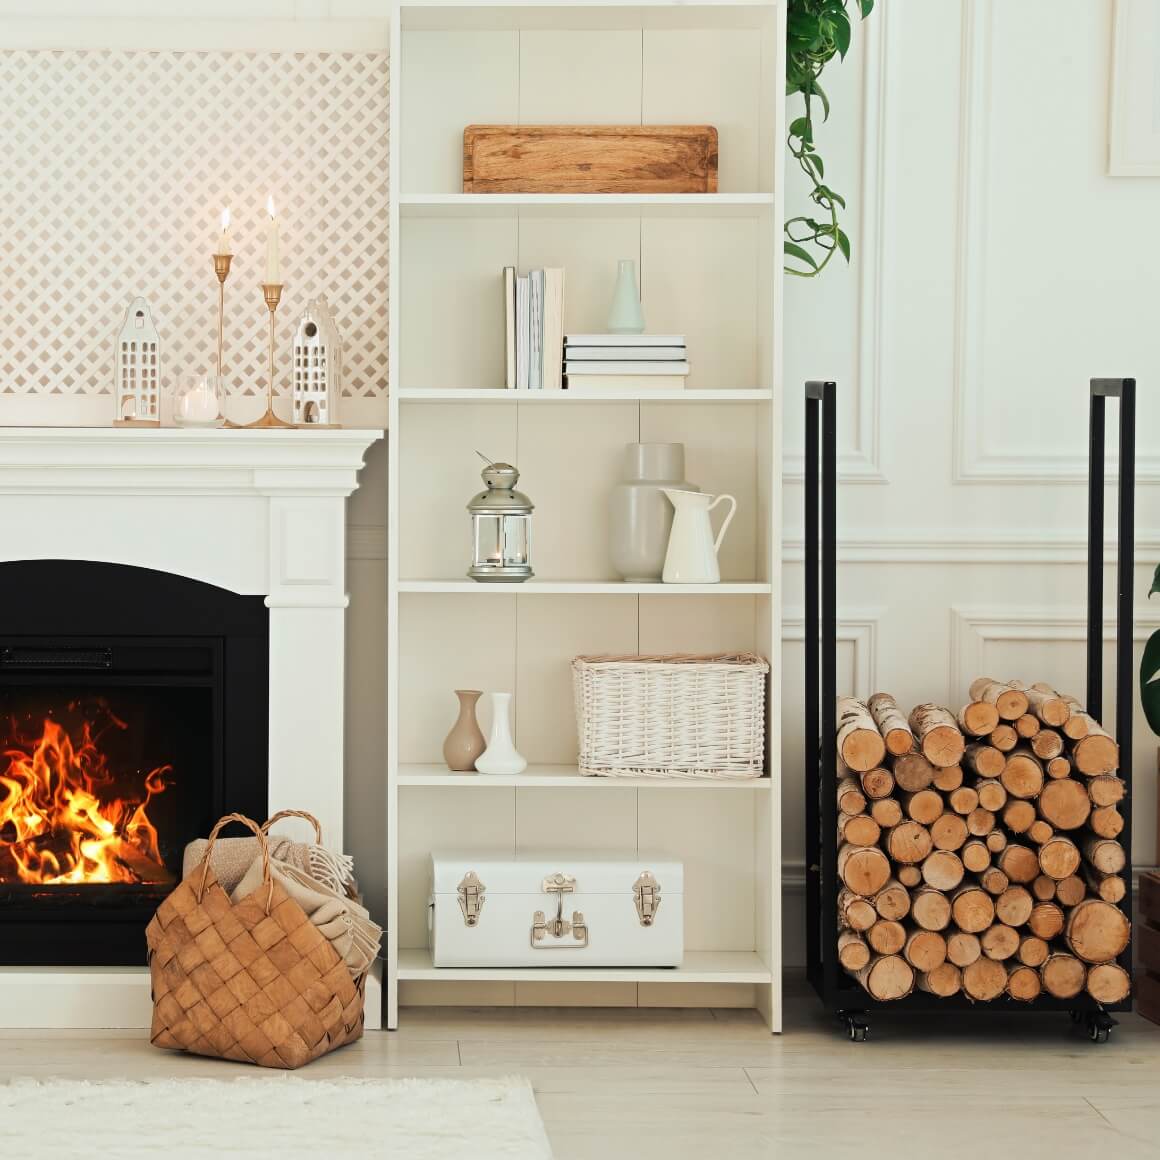 Things to Remember for Storing Firewood Indoors